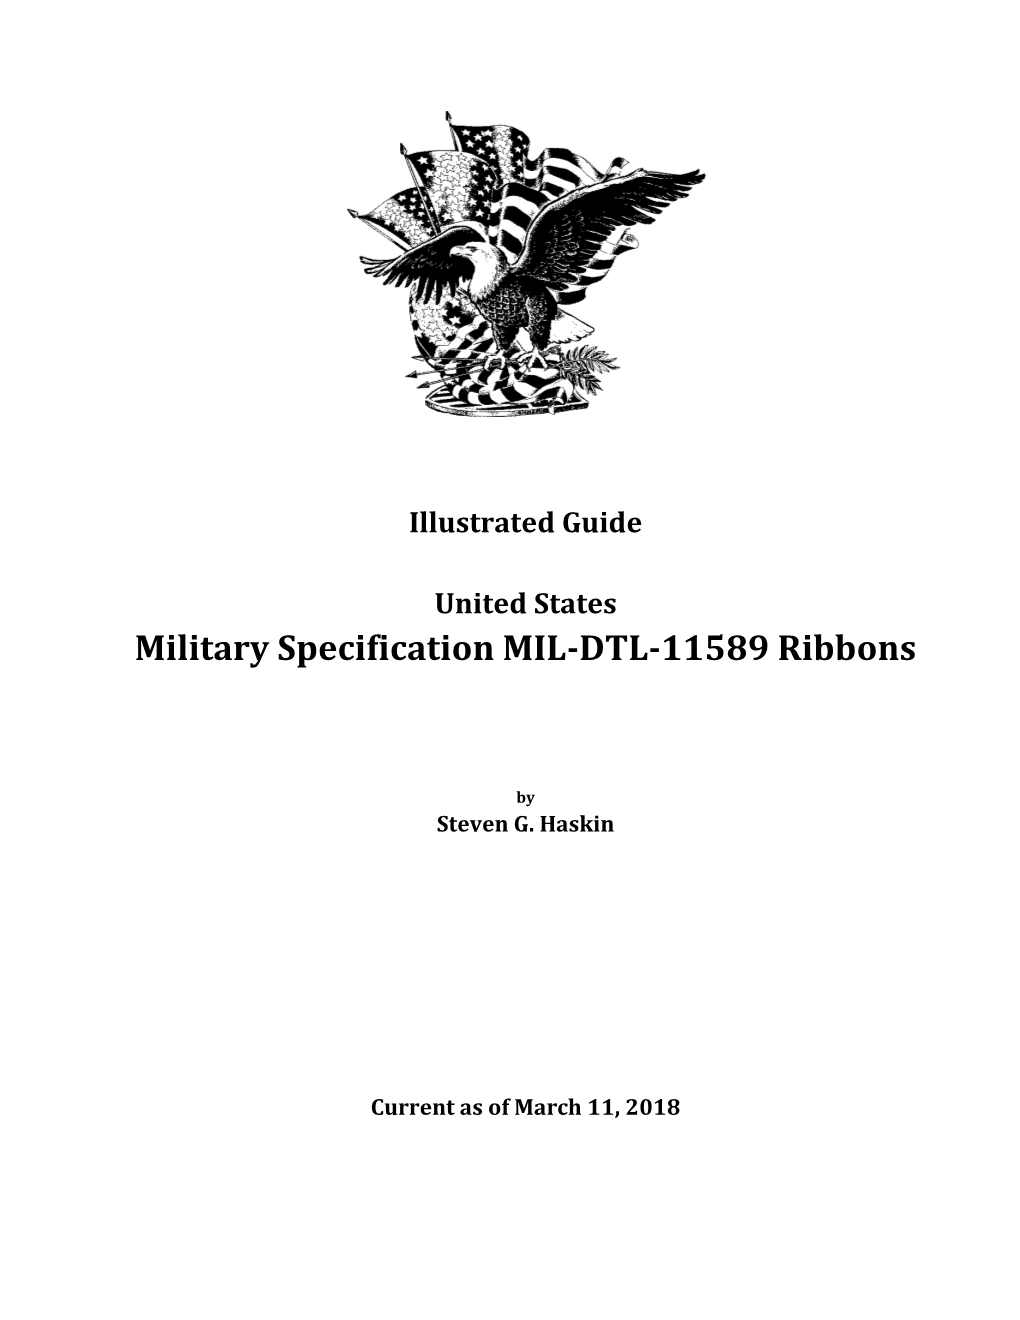 Military Specification MIL-DTL-11589 Ribbons